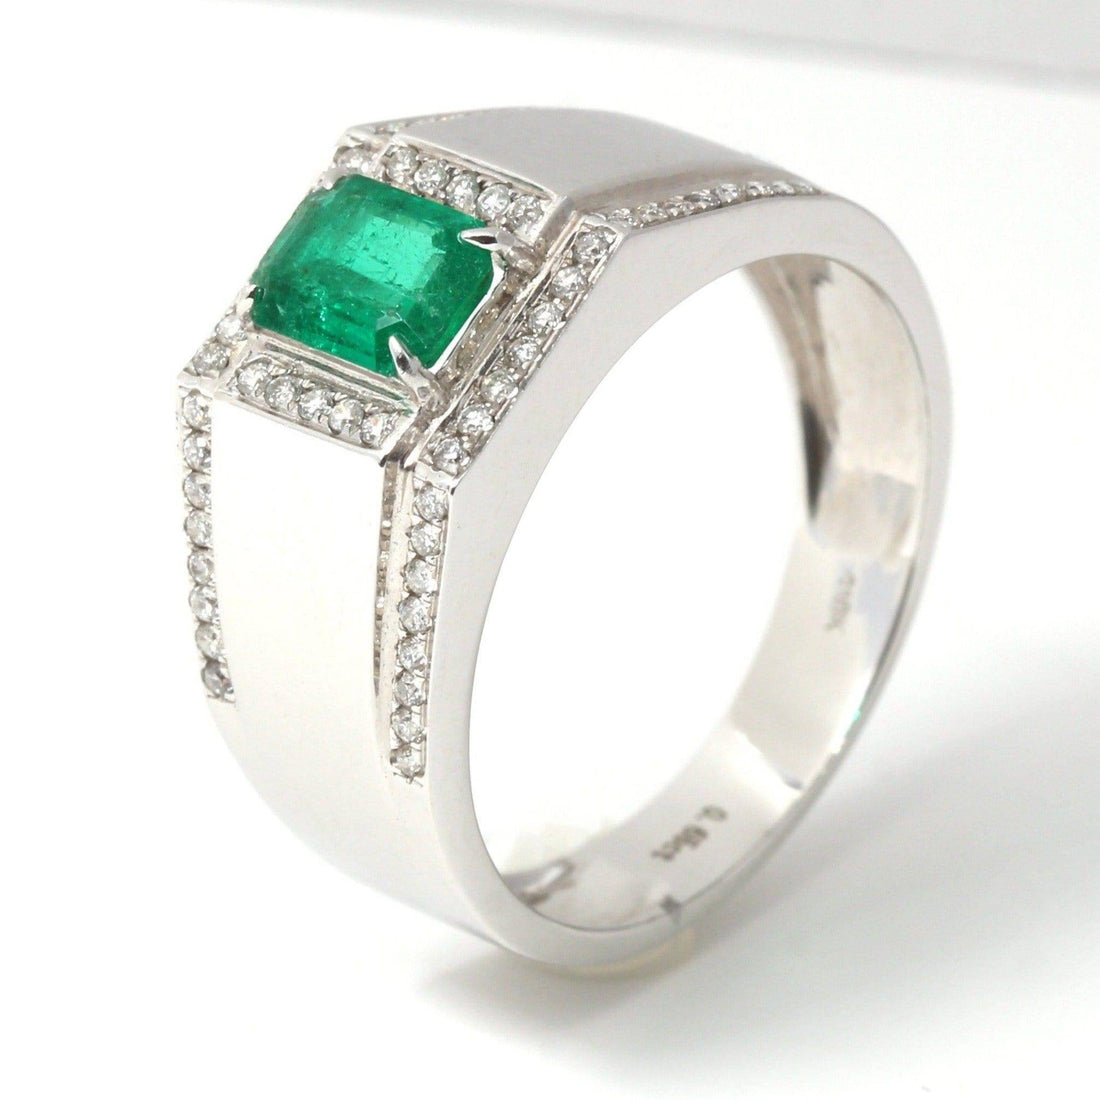 Baikalla Jewelry Gold Men's Rings 8 18k White Gold Natural 0.65 ct Emerald Men's Halo Ring with Diamonds